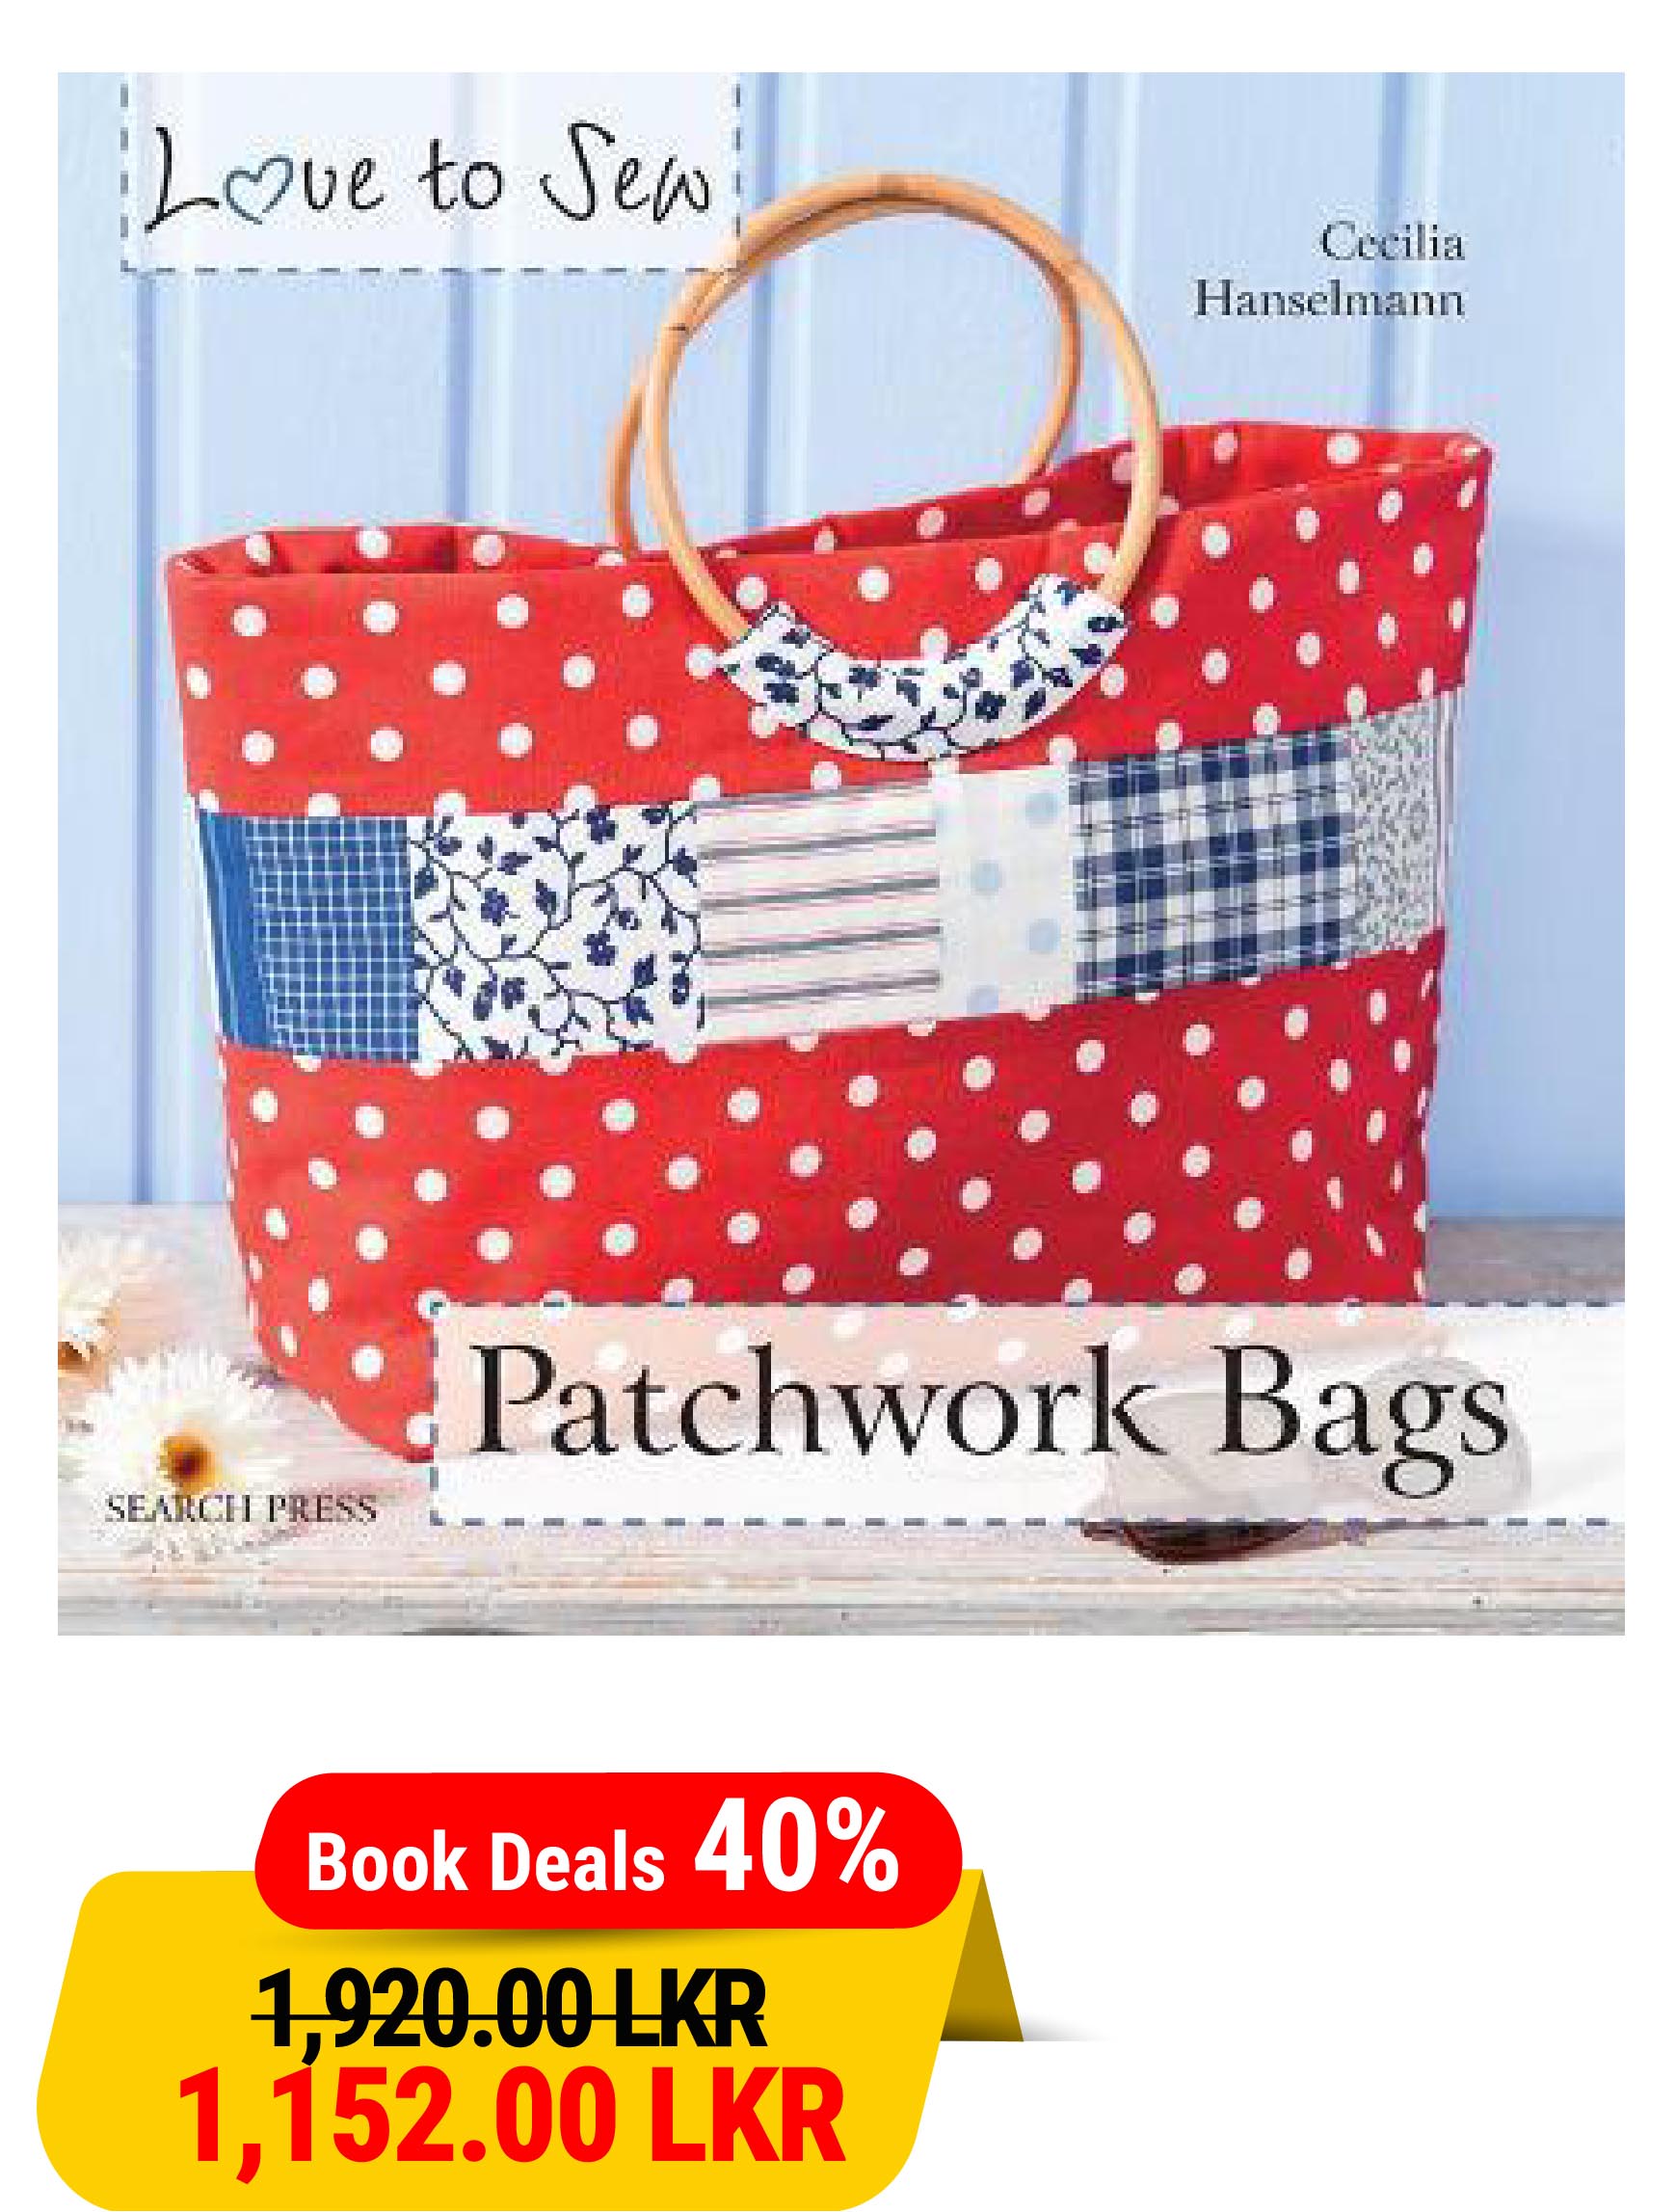 Patchwork Bags (Love to Sew)